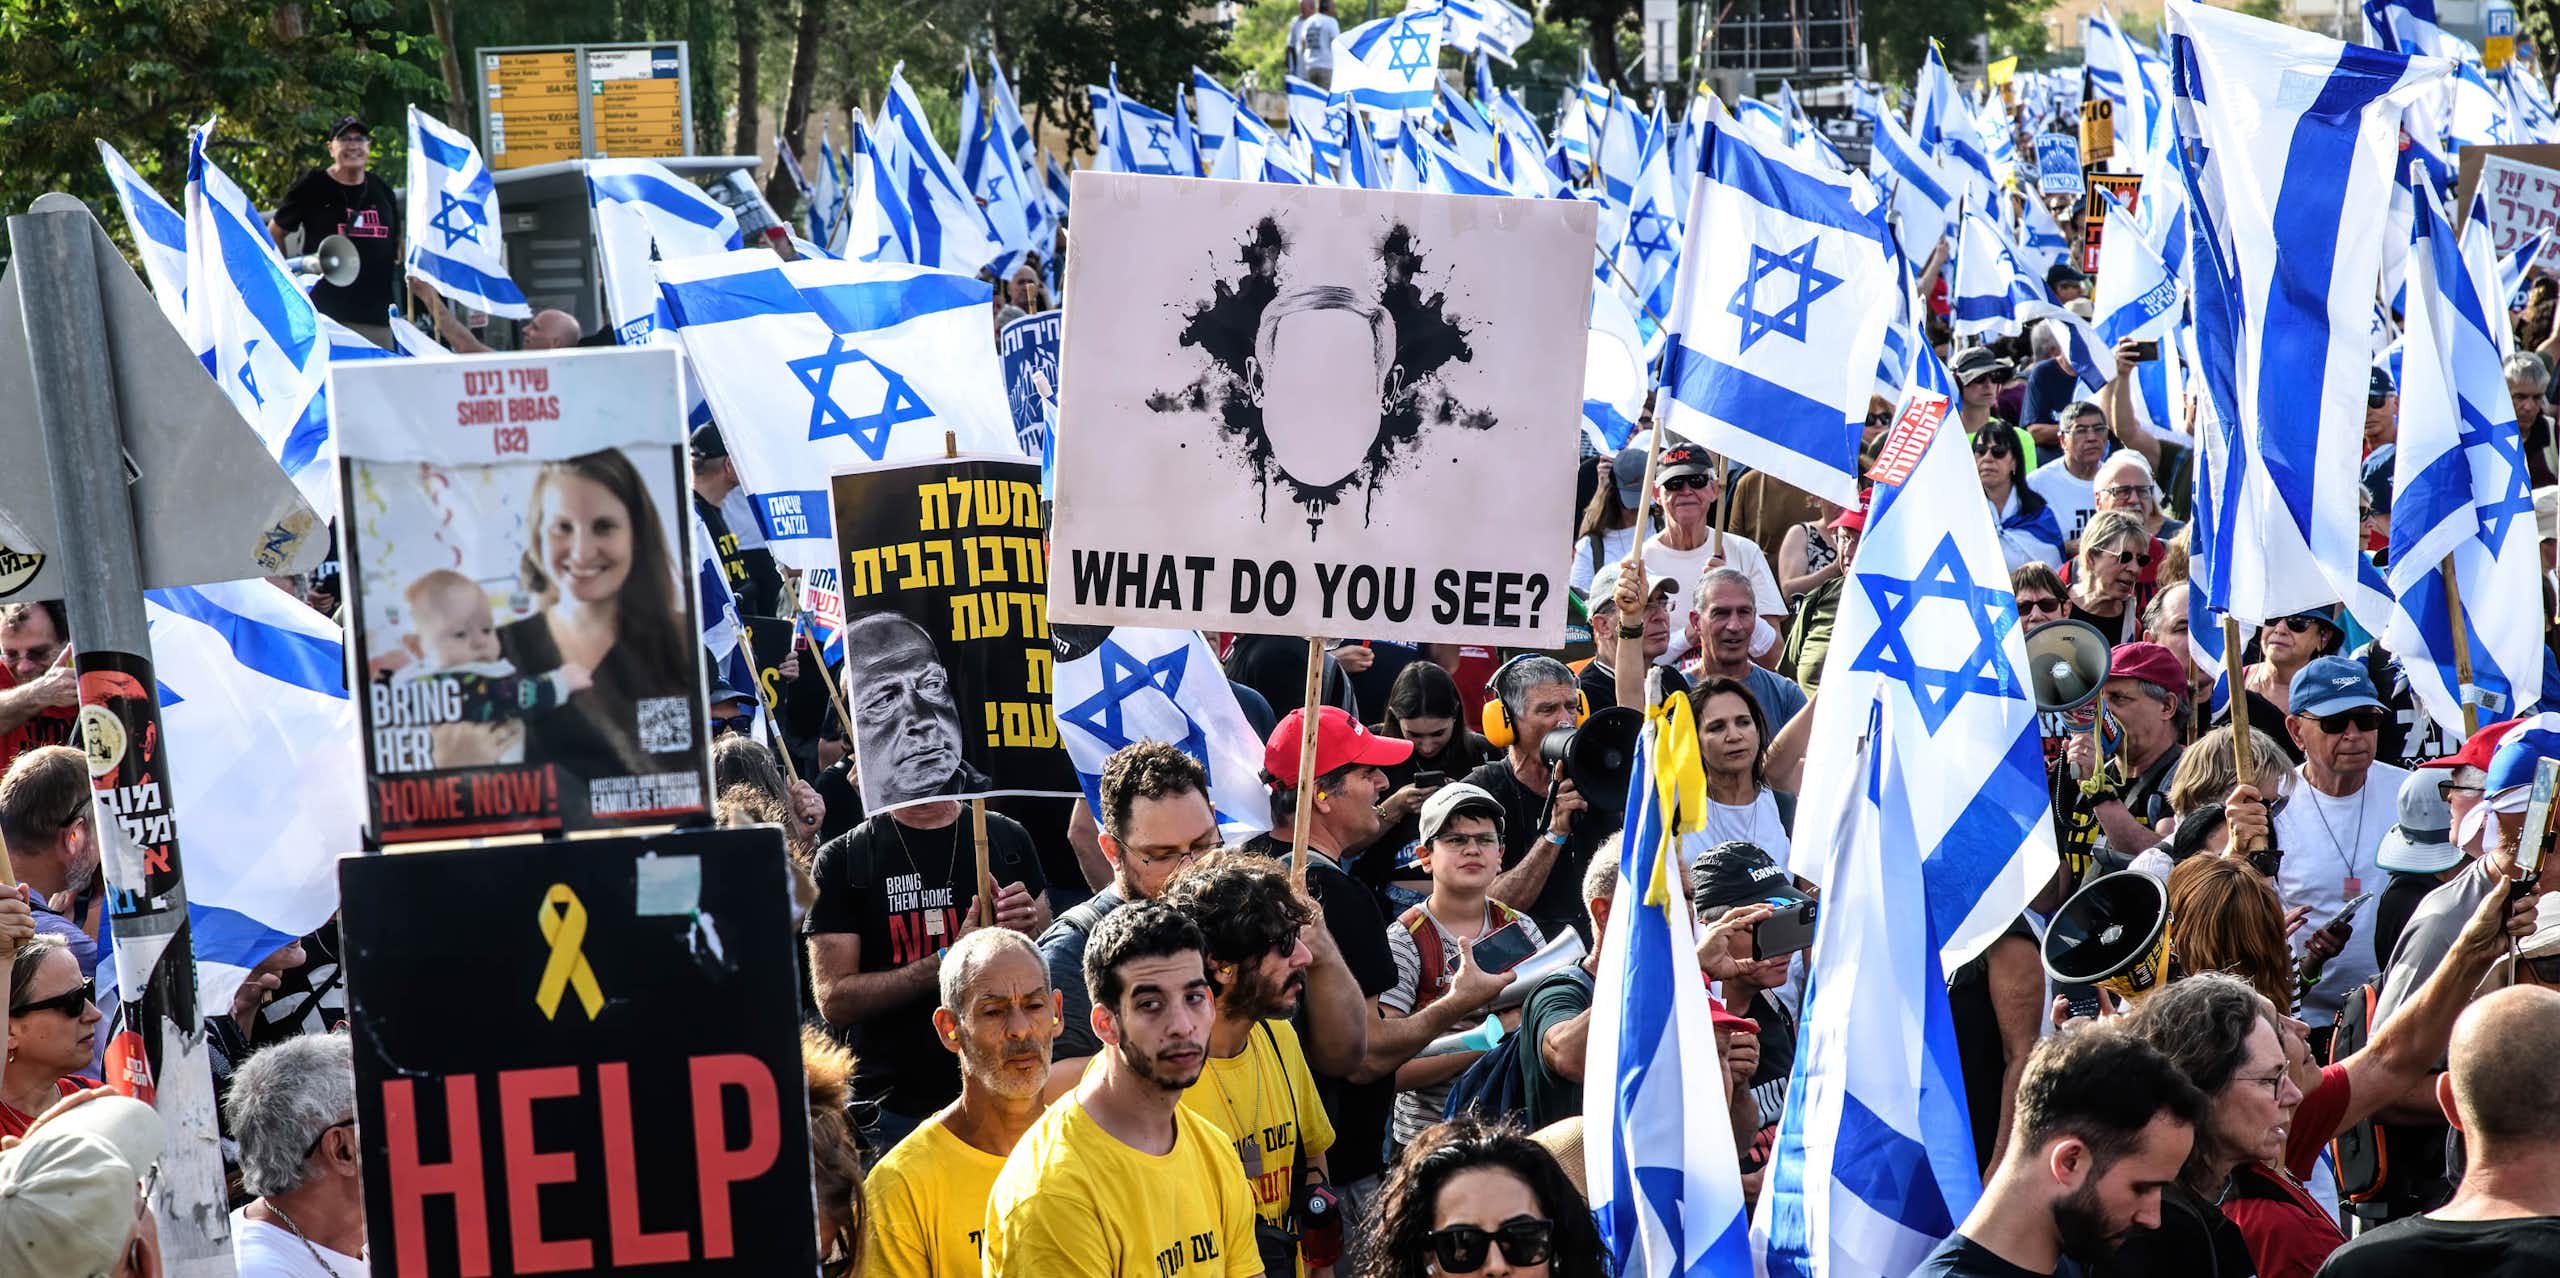 A large crowd of people stand in the streets and hold Israeli flags and signs that say 'Help' and an image of. man's head with the words 'What do you see?'